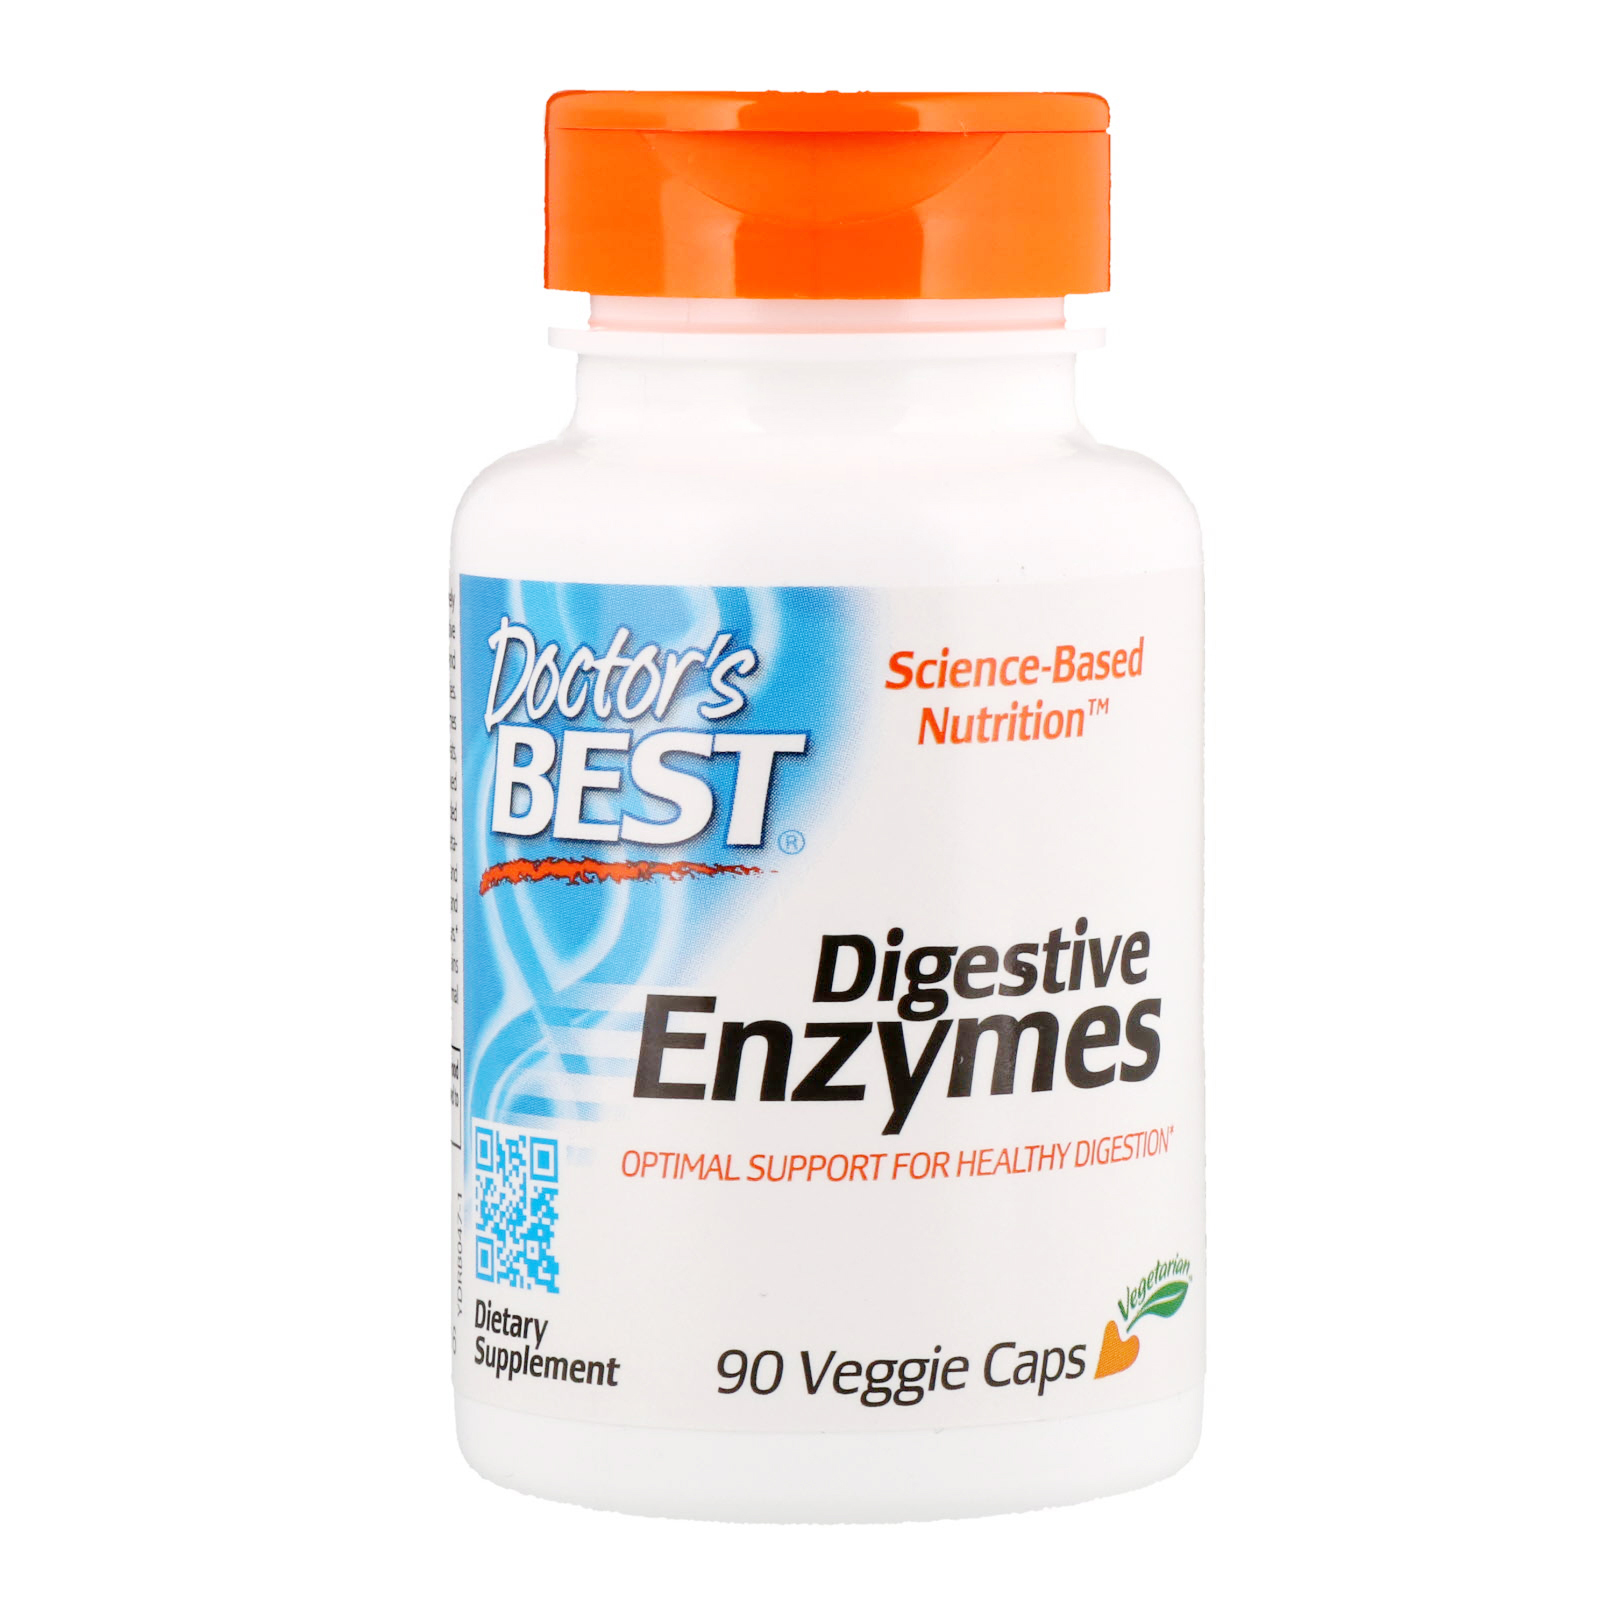 What Is The Best Digestive Enzyme Supplement - Digestive Enzyme Supplement Dr. Weil